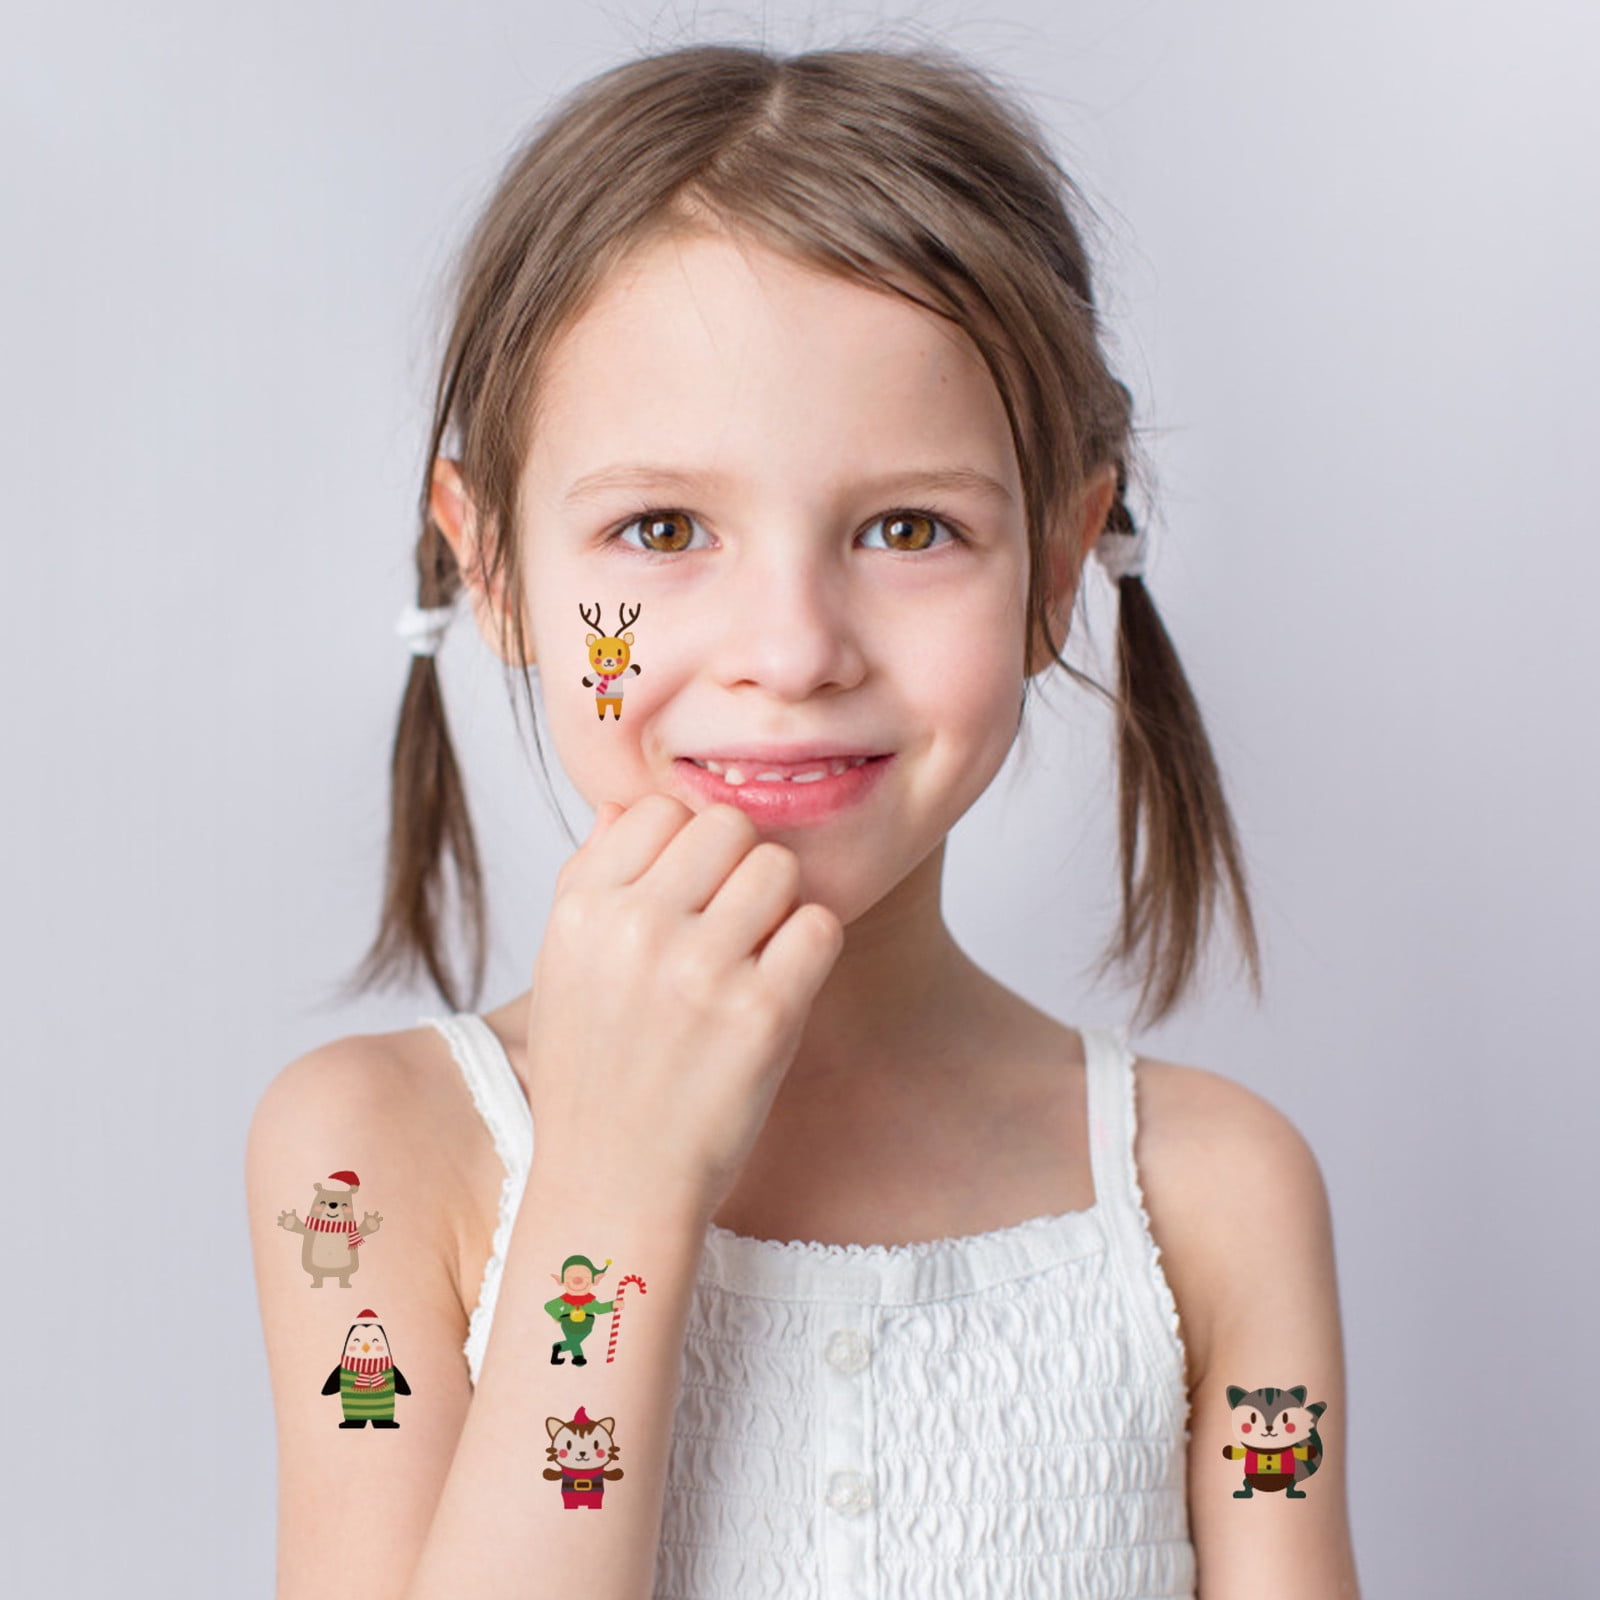 Amazon.com : 40Pcs Temporary Tattoos for Kids, Children's Temporary Tattoo  Toys, DIY Sticker Arts, Birthday Party Supplies Decorations Party Favors :  Beauty & Personal Care